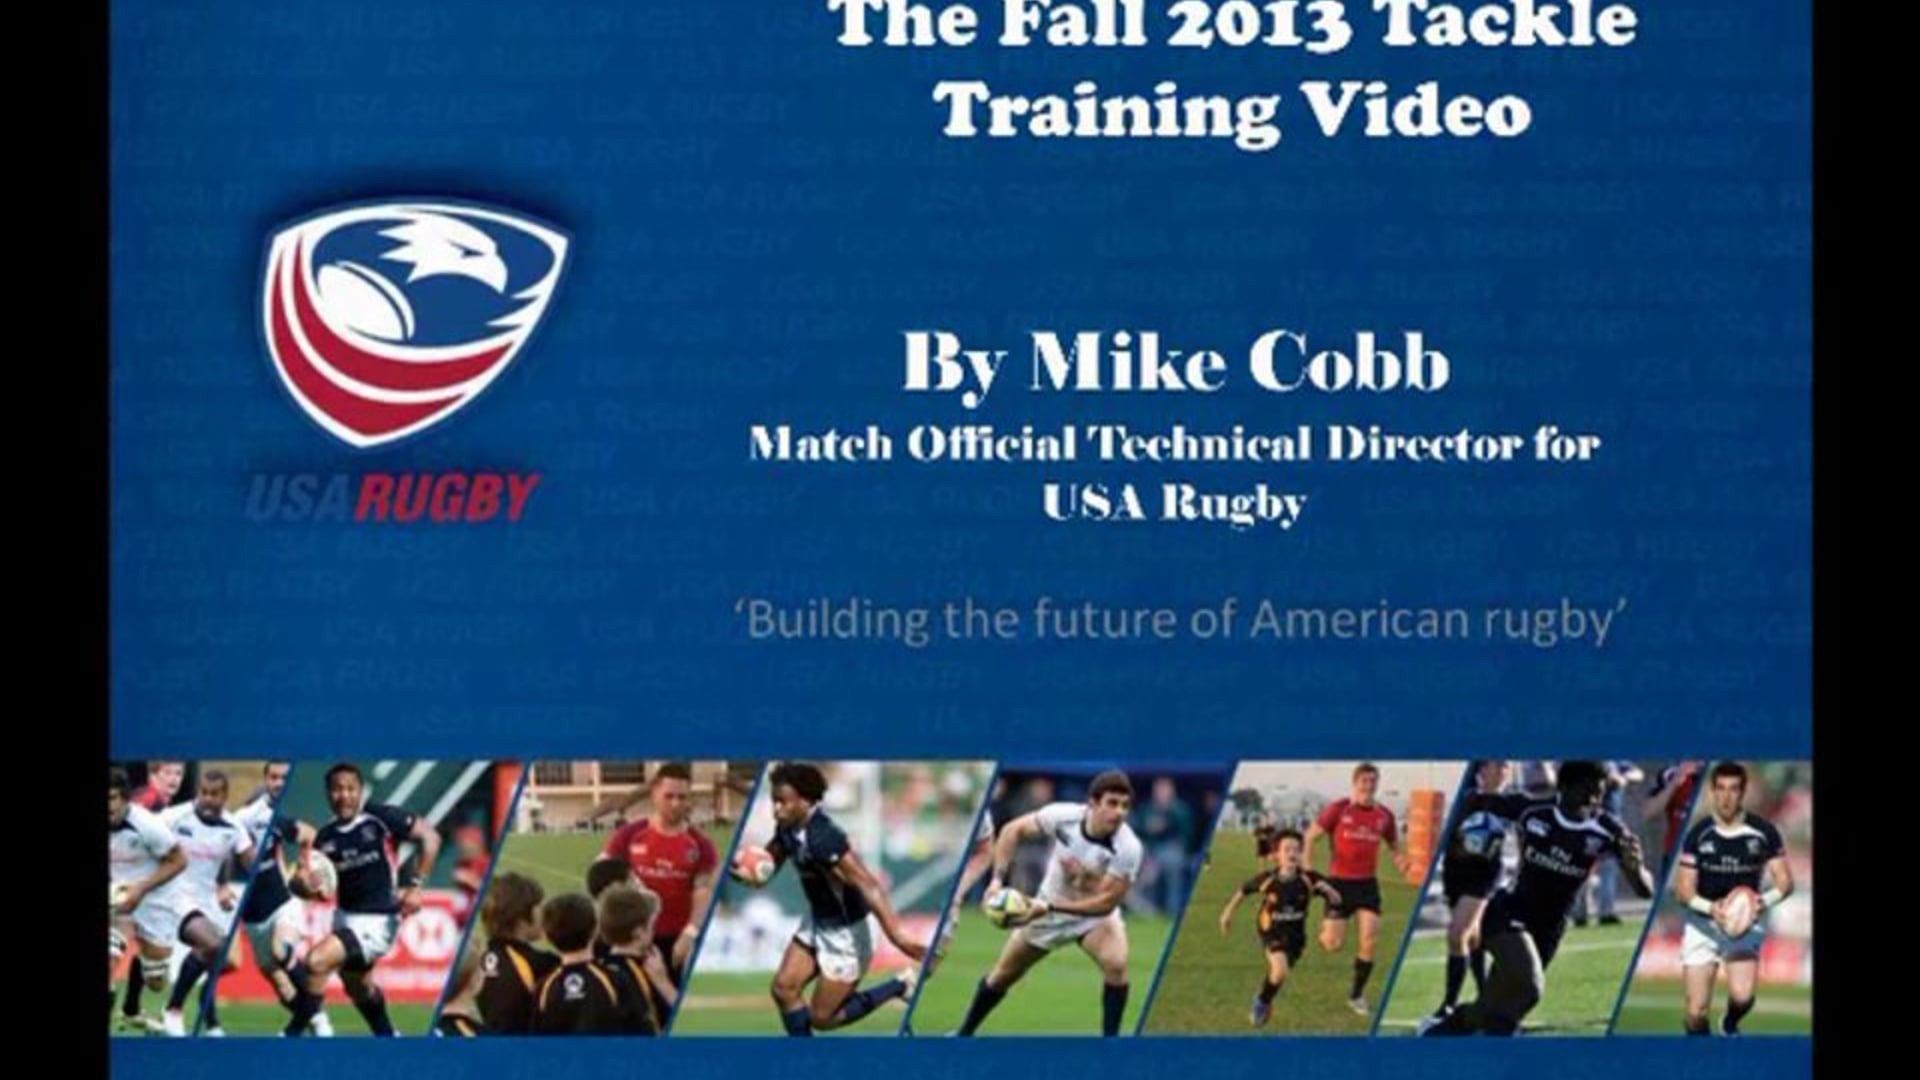 final complete tackle training video